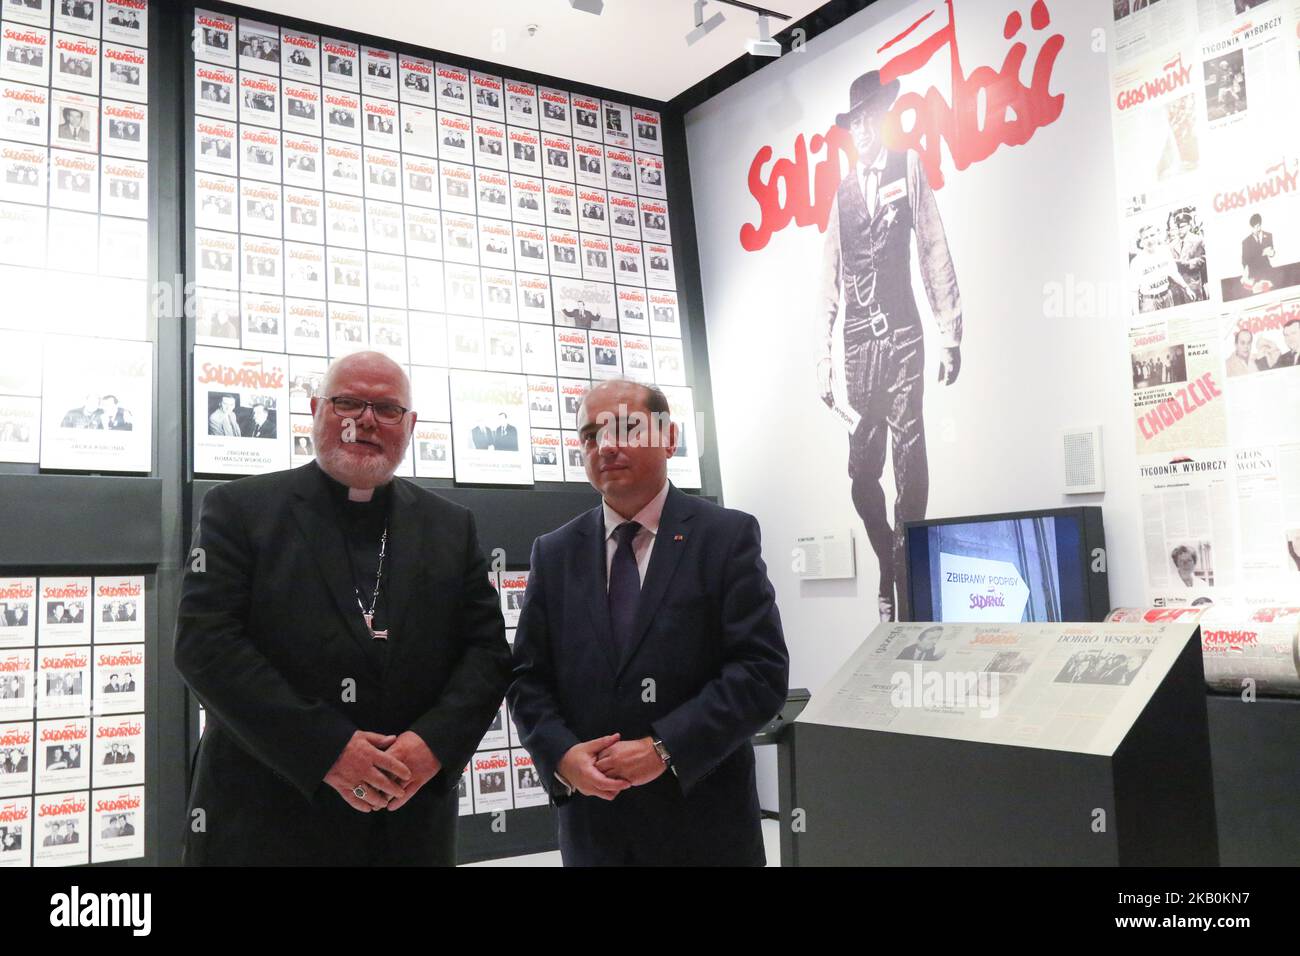 Cardinal Reinhard Marx is seen in Gdansk, Poland on 30 August 2018 Reinhard Marx visited European Solidarity Centre in Gdansk, and meet with Lech Walesa in his office. Marx is a German cardinal of the Catholic Church, chairman of the German Bishops Conference, Archbishop of Munich and Freising and member of the College of Cardinals. (Photo by Michal Fludra/NurPhoto) Stock Photo